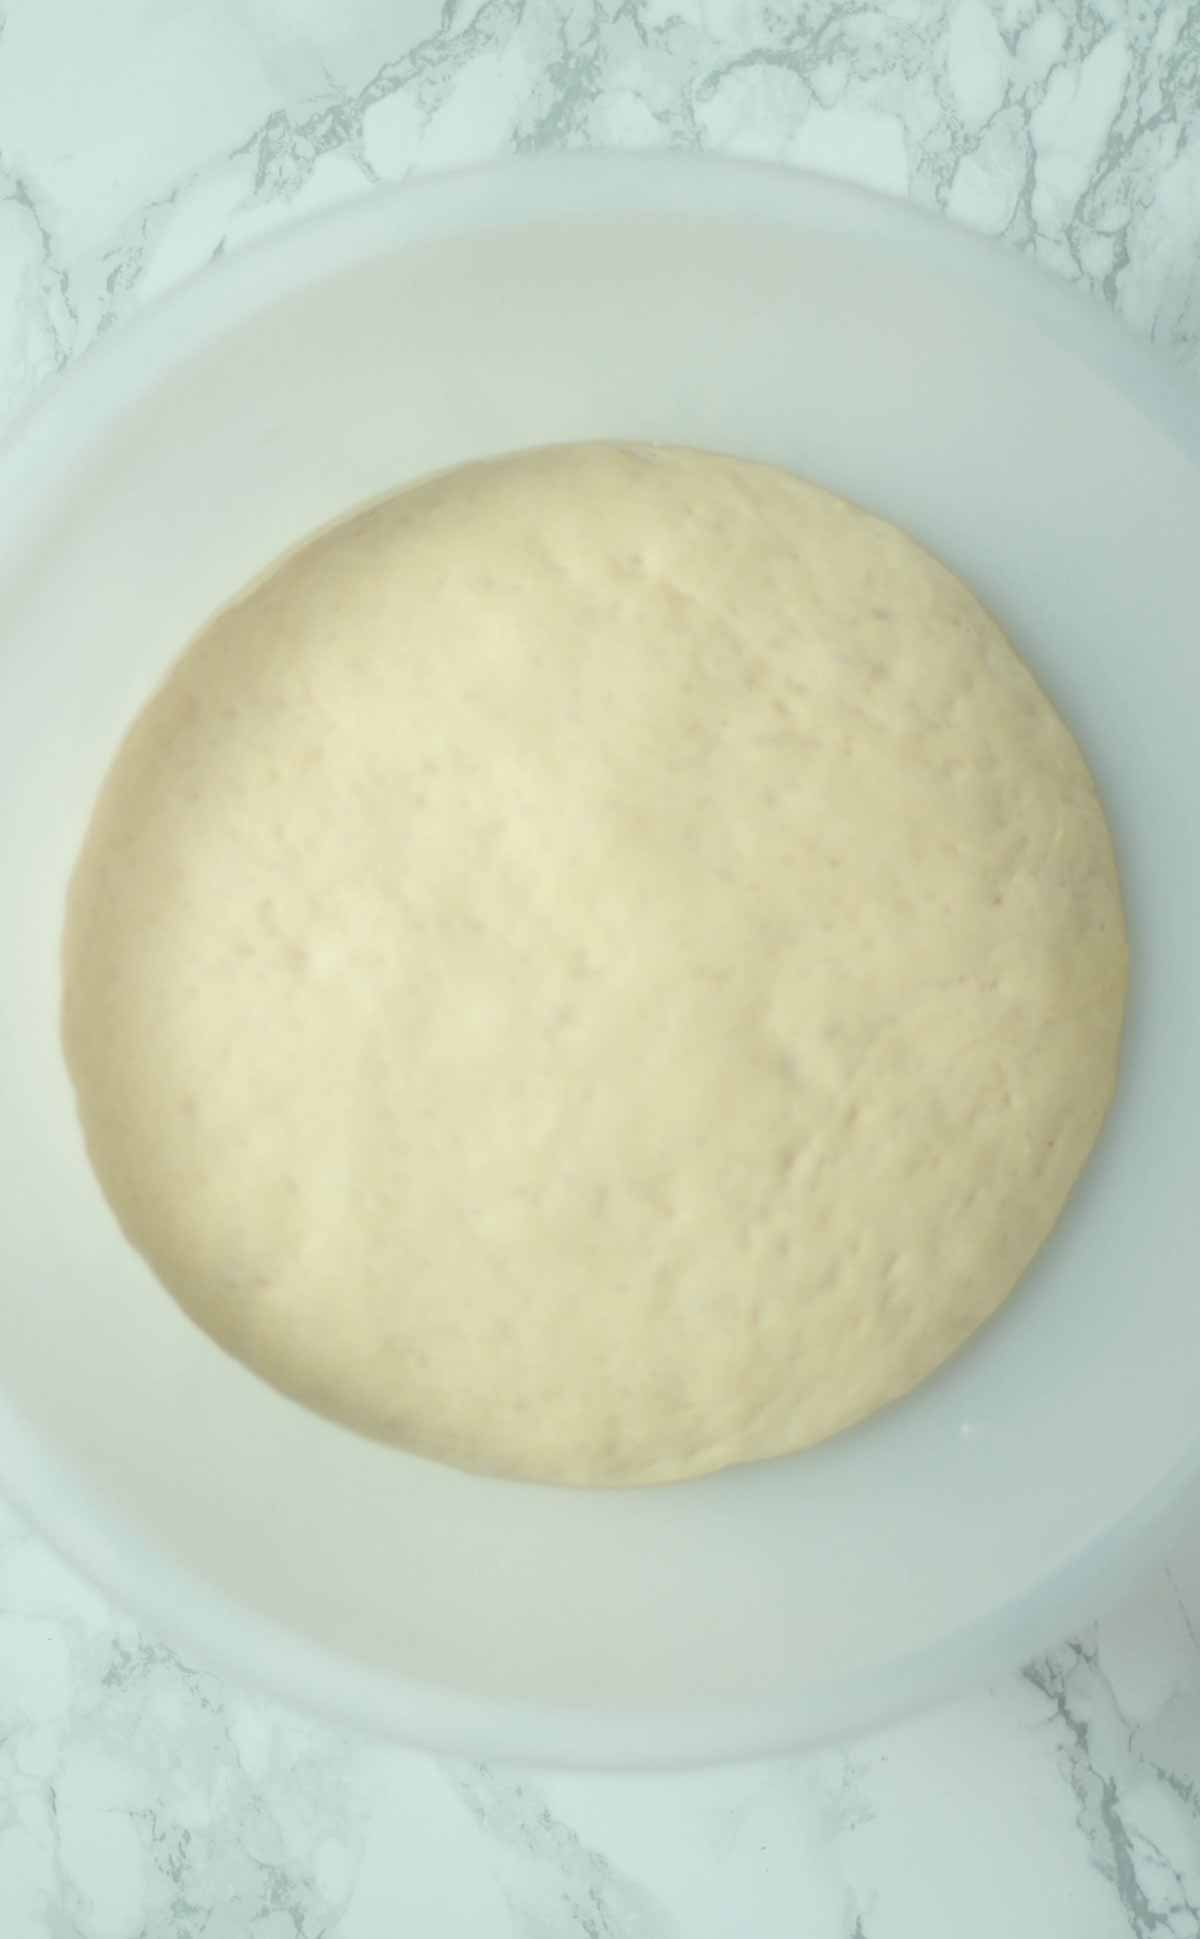 Proofed Dough In A Bowl